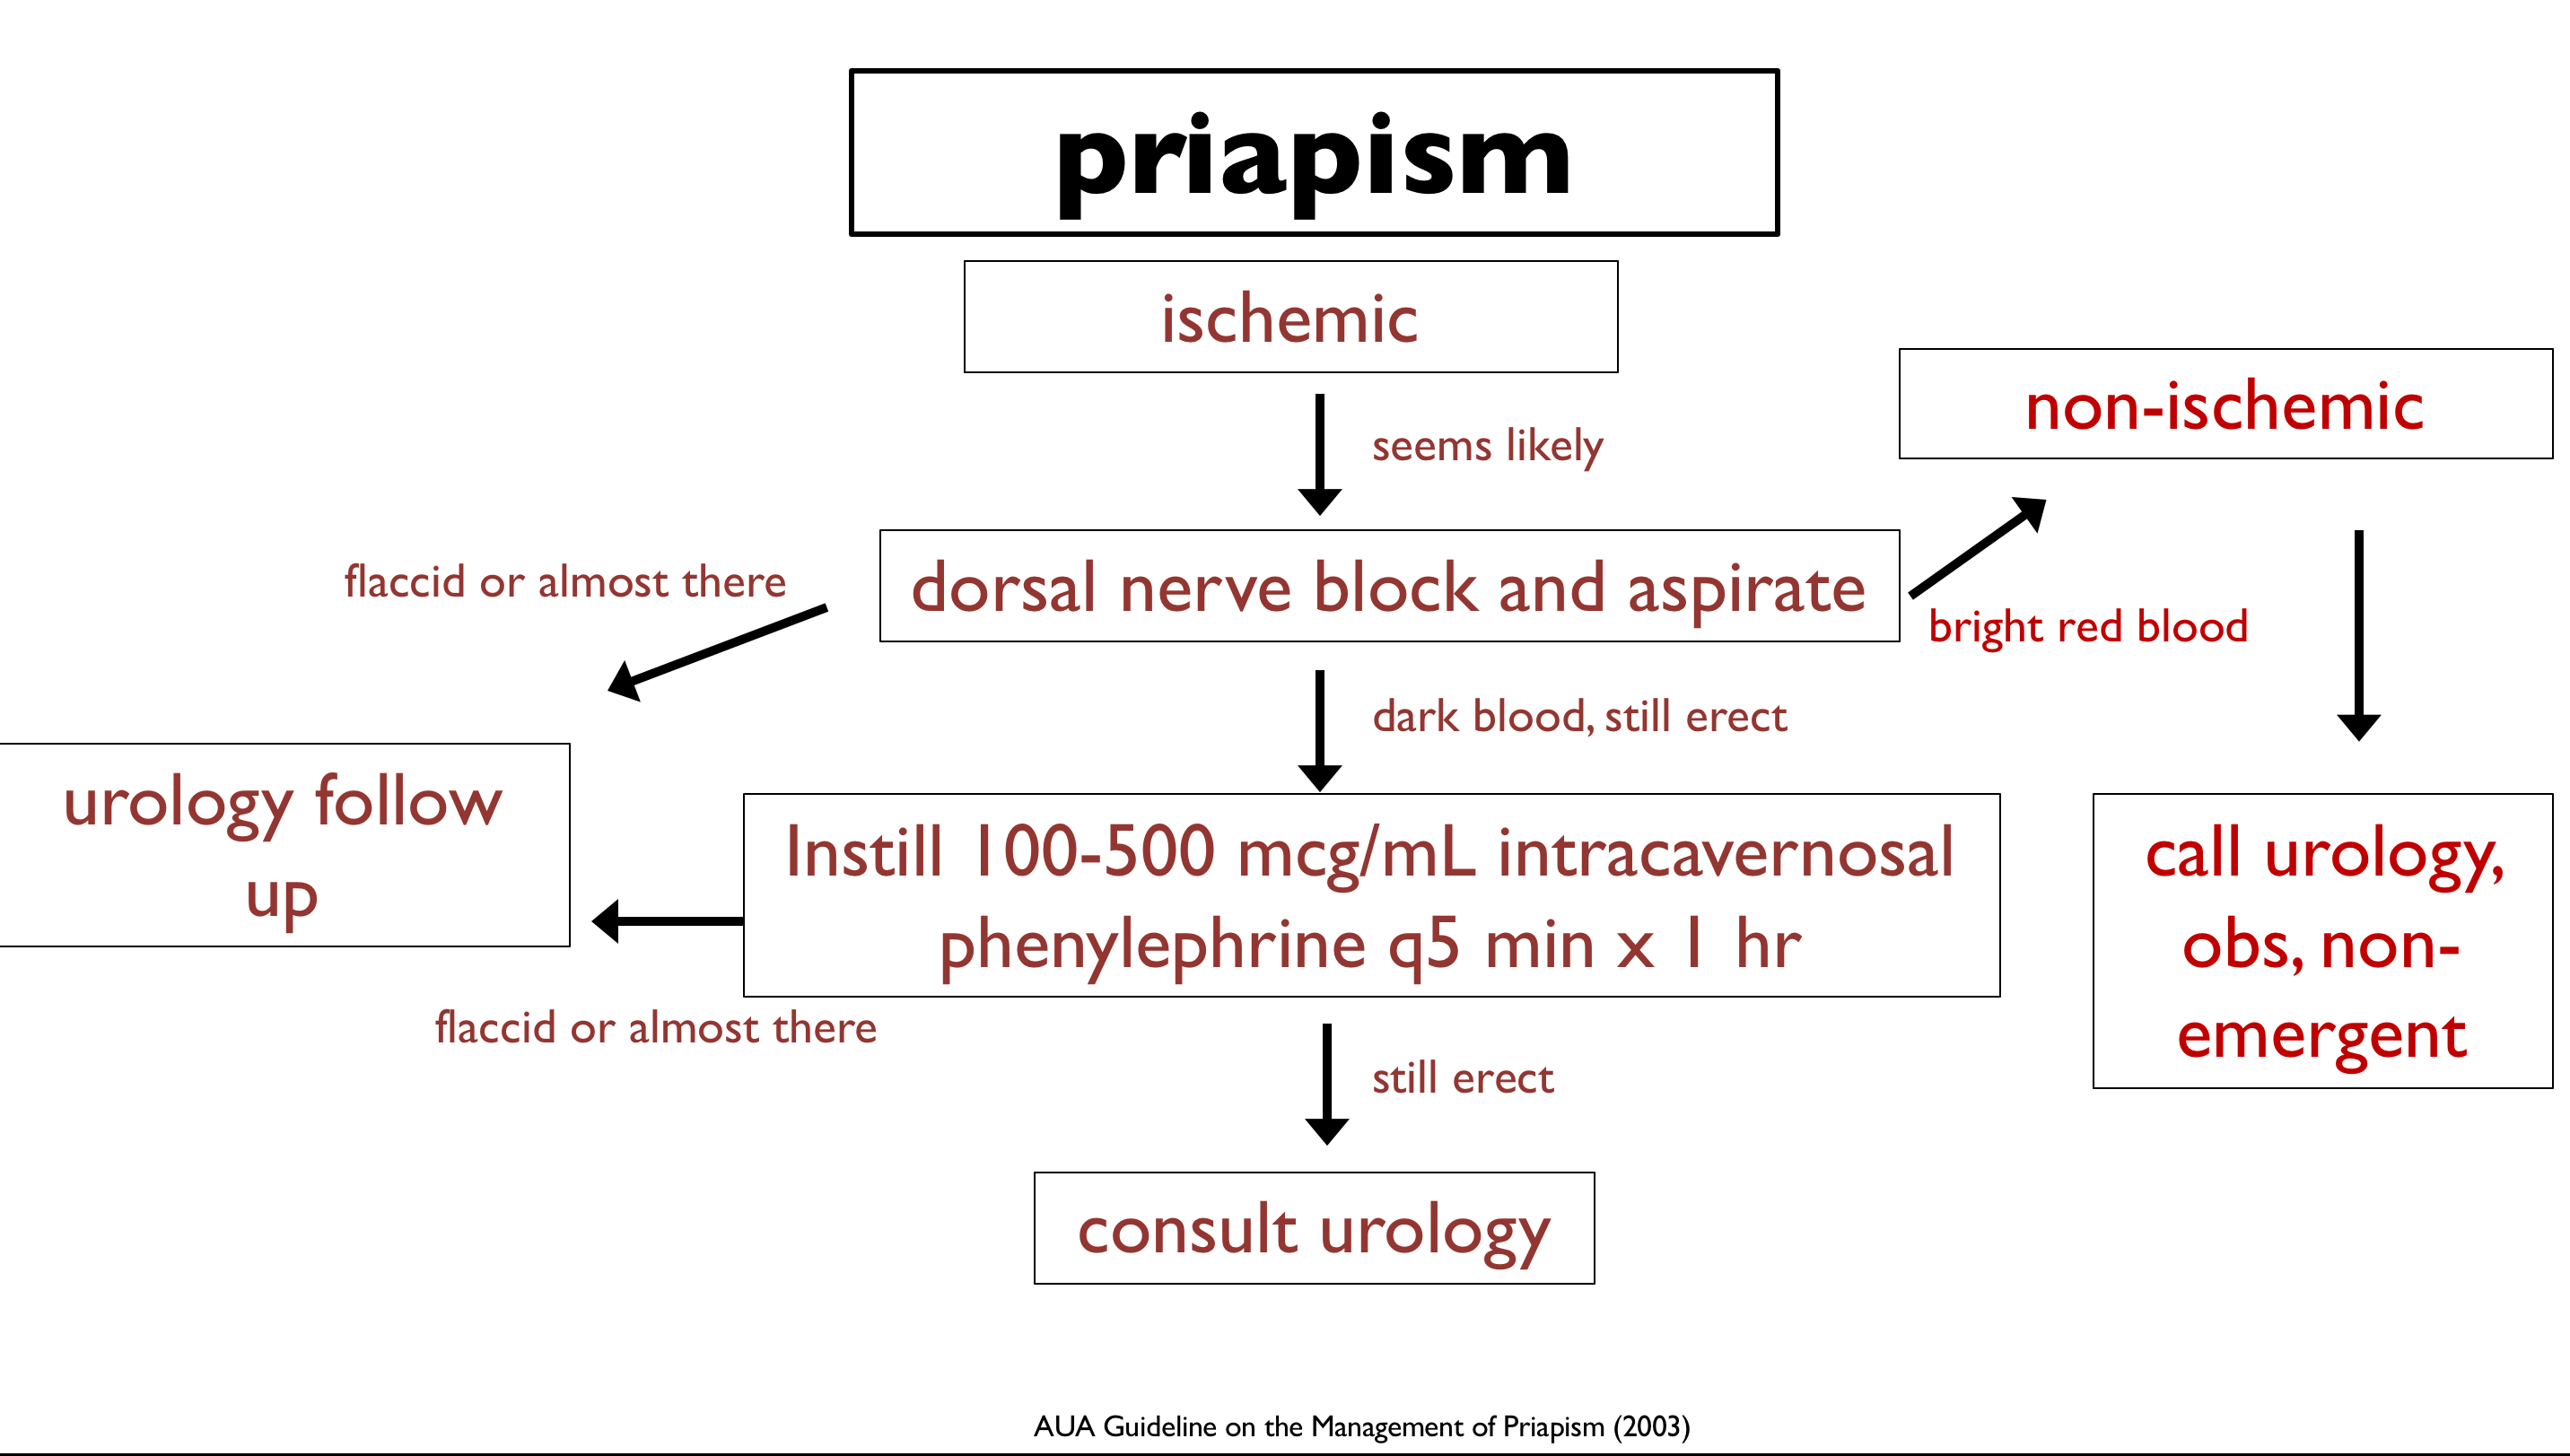 treatment options for priapism